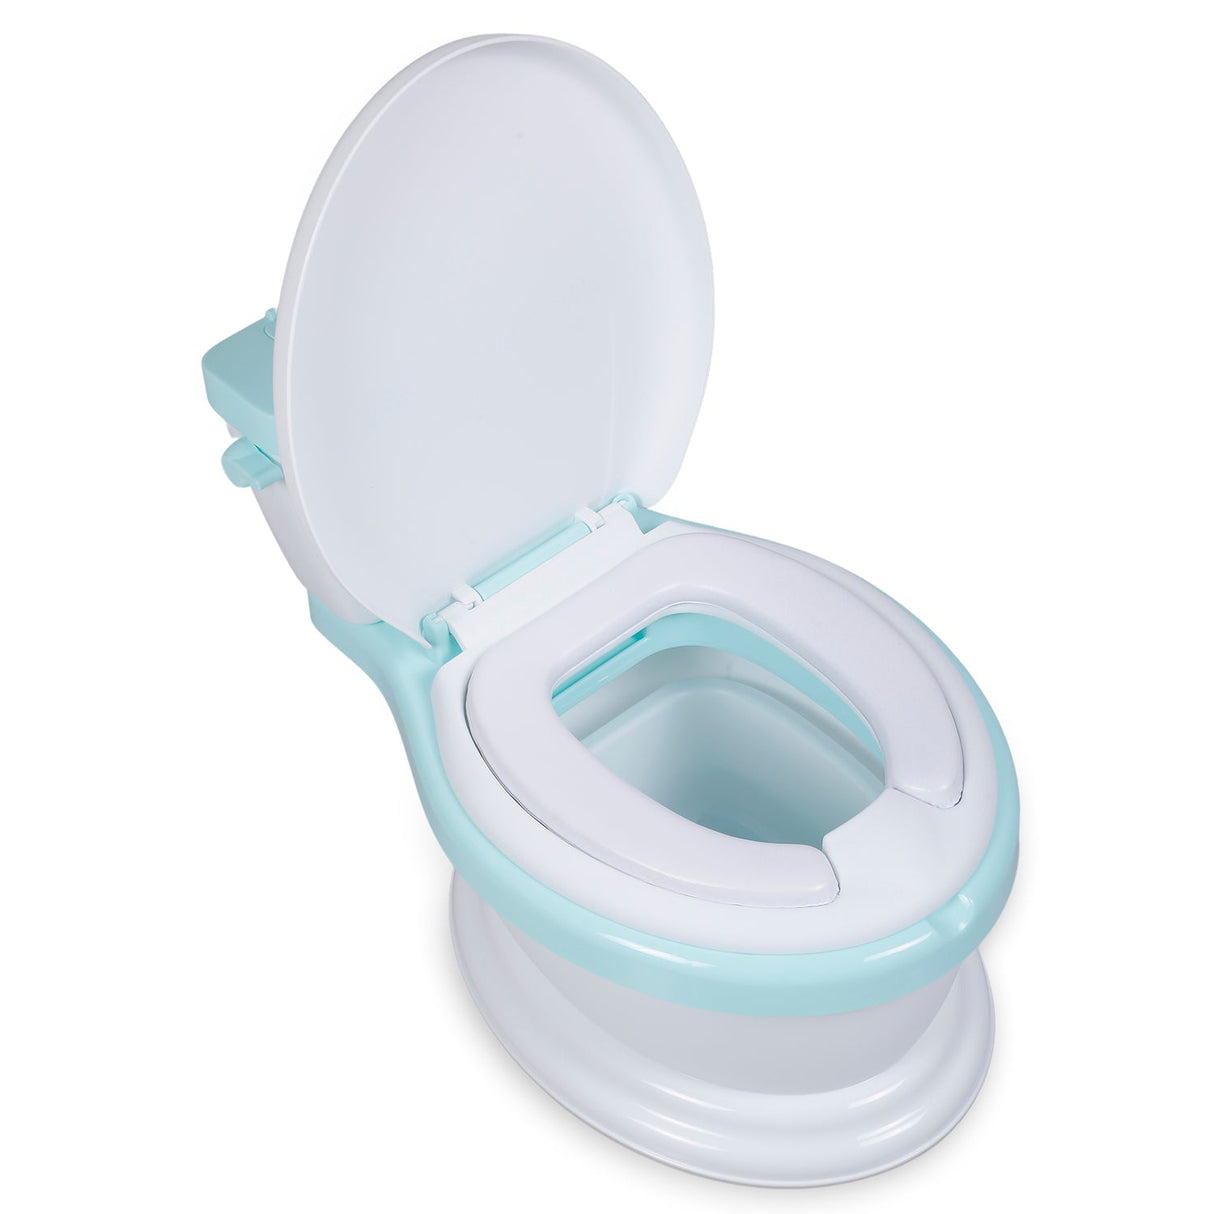 Toilet Training Potty Chair Realistic Western Style